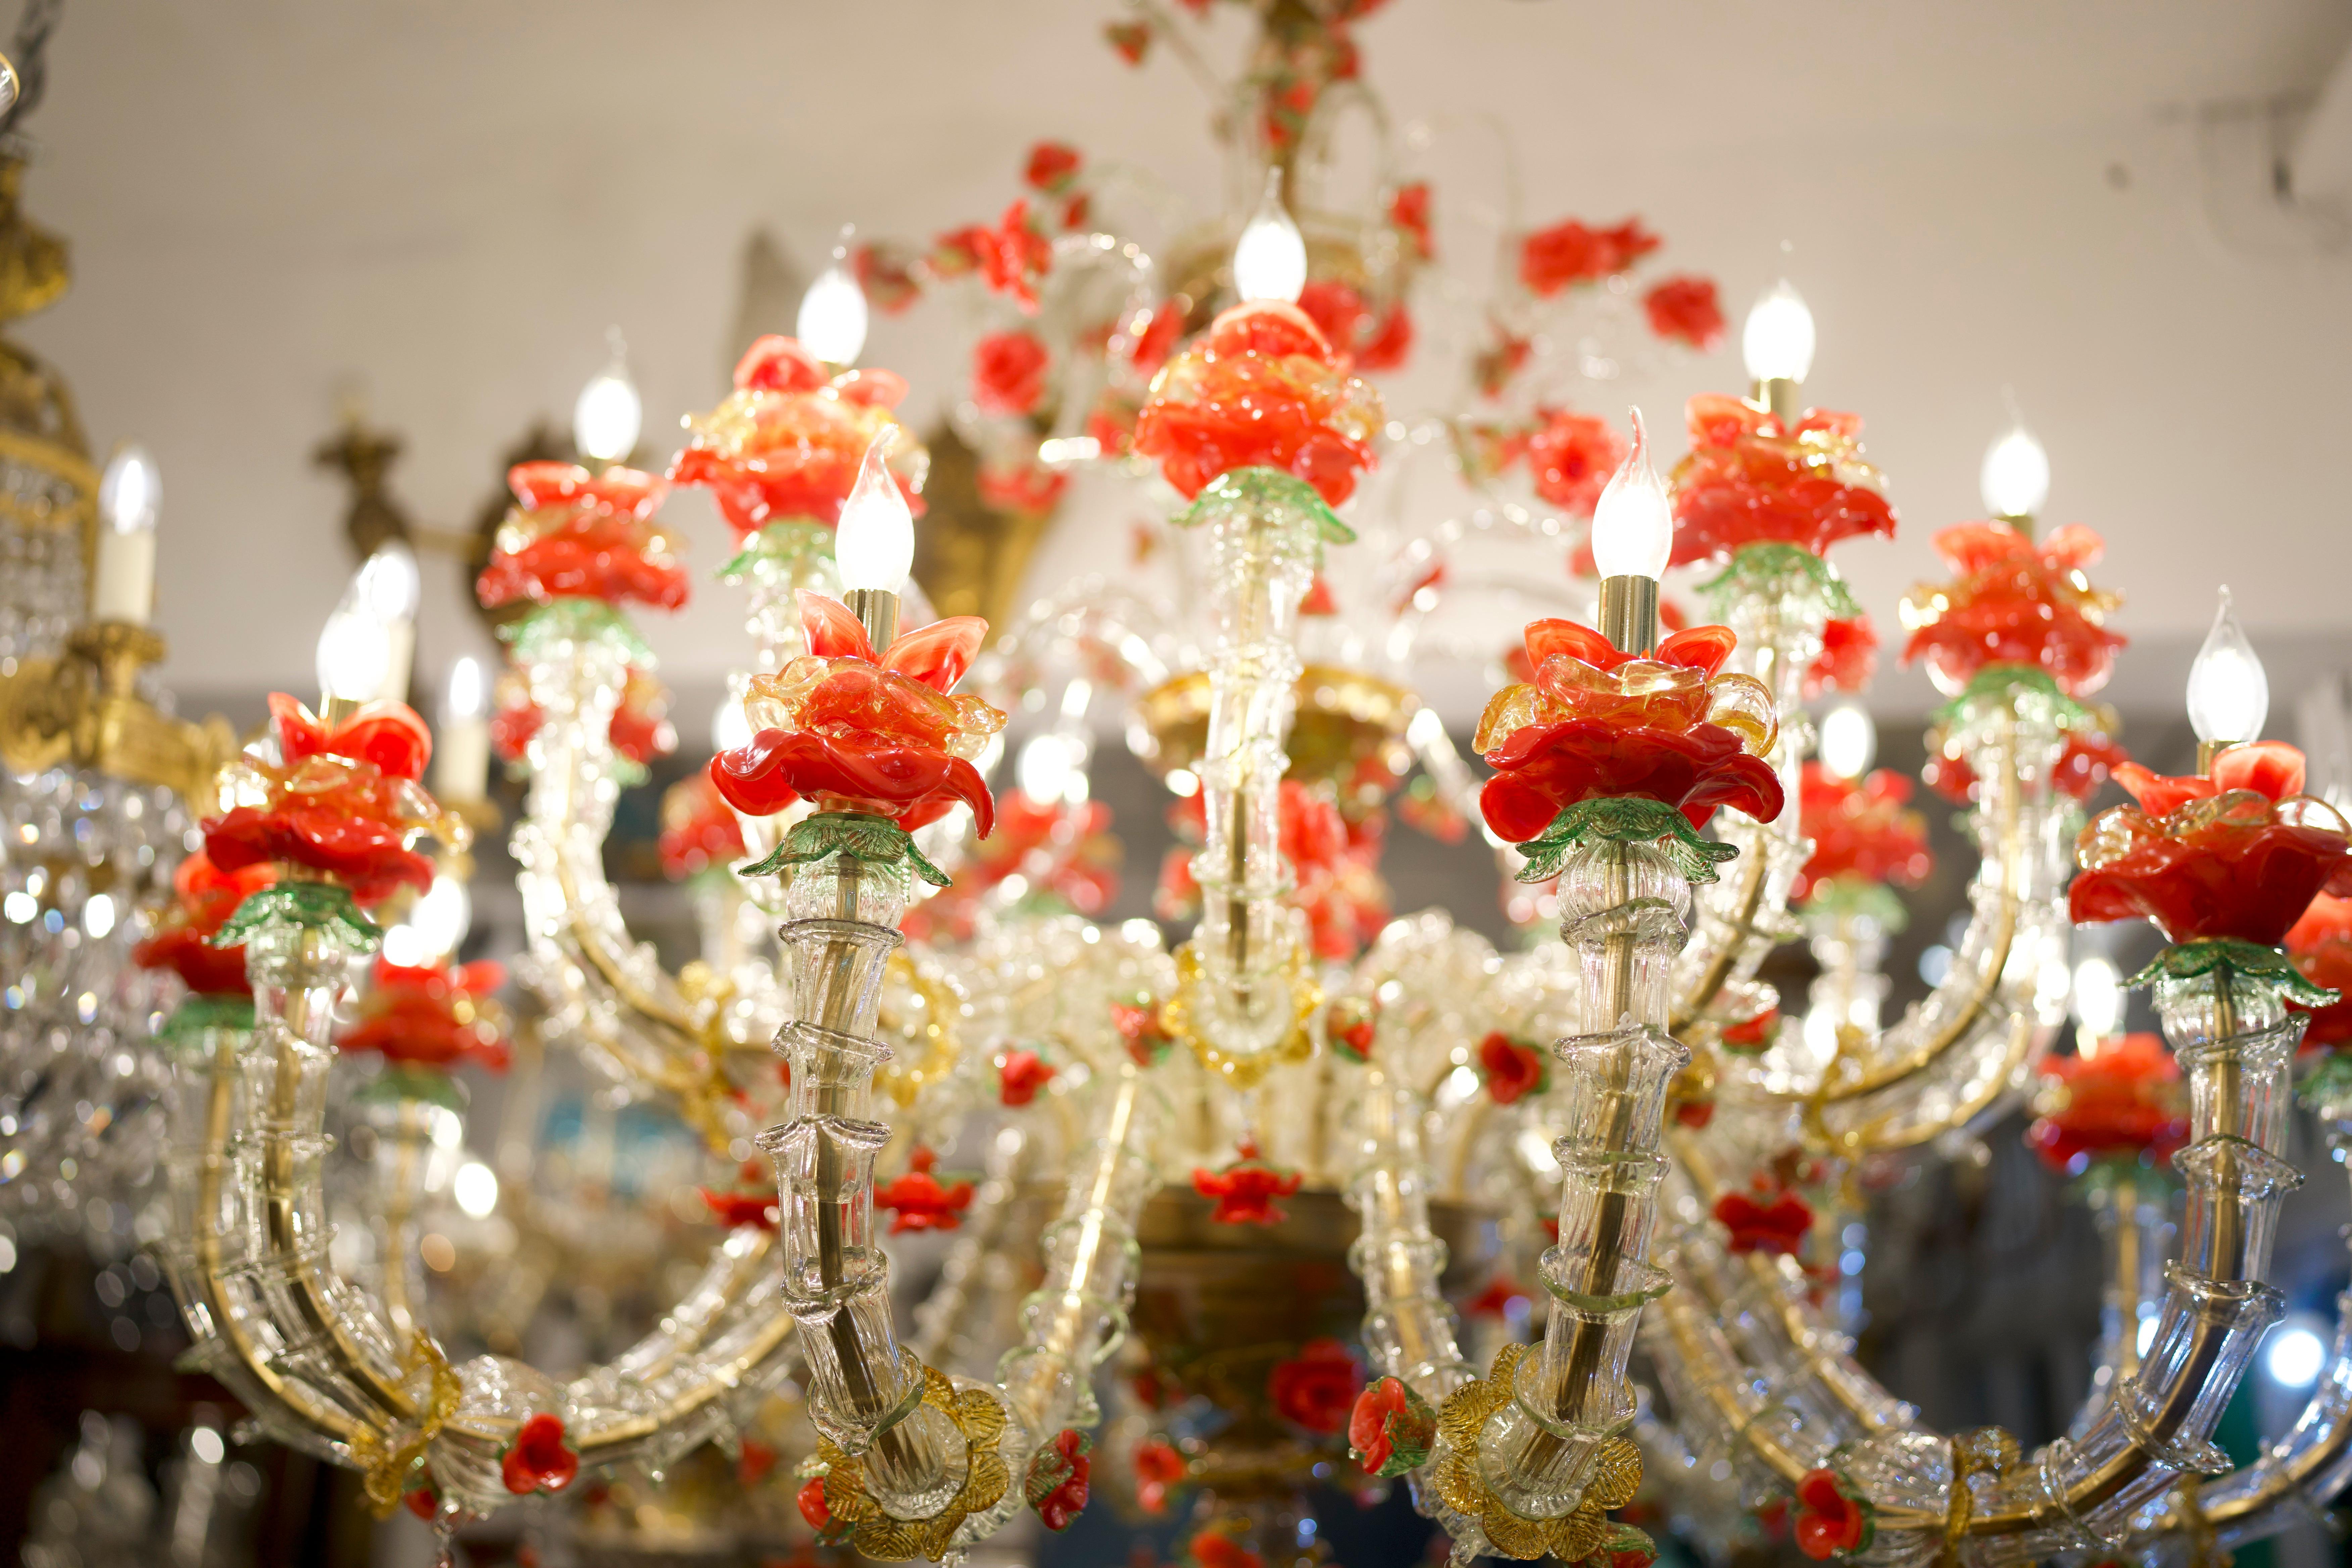  A stunning 19th Century Murano Glass Rezzonico Style Chandelier With Red Roses. 

This ornate and exuberant Venetian chandelier has been hand-crafted with the finest hand-blown glass from the famous island of Murano, and is adorned with a